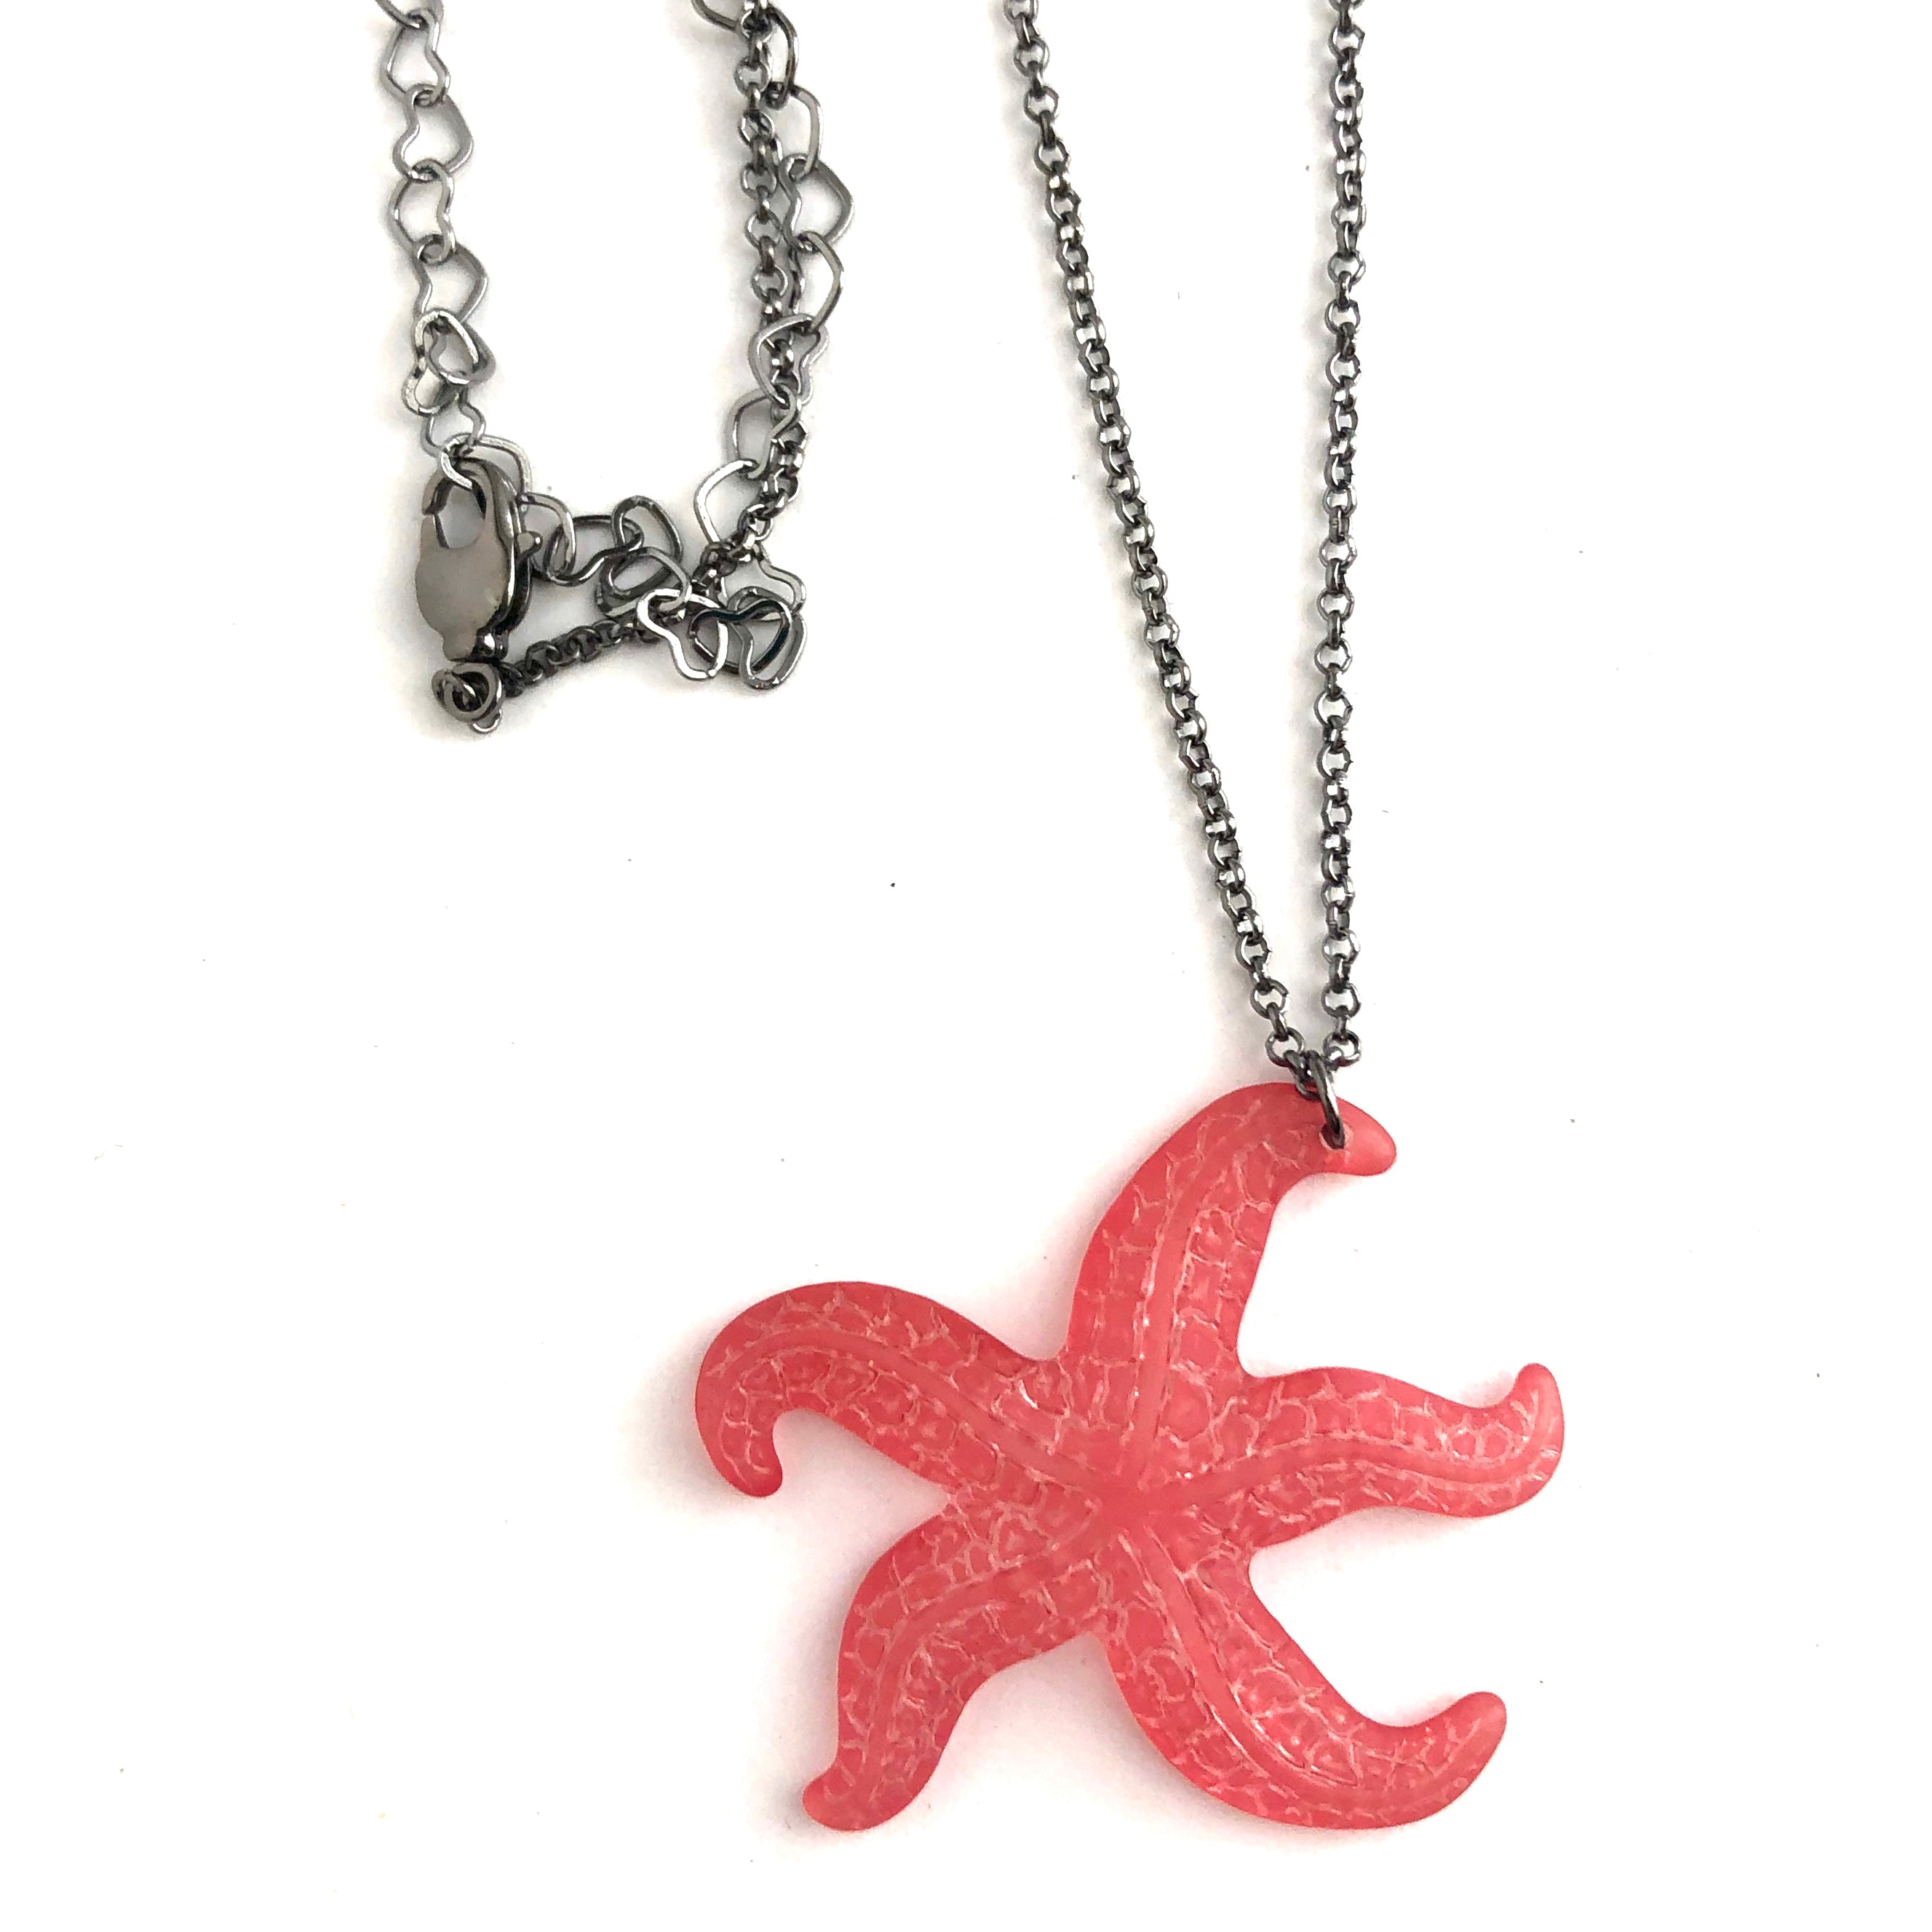 Cranberry Frosted Starfish Chain Drop Necklace